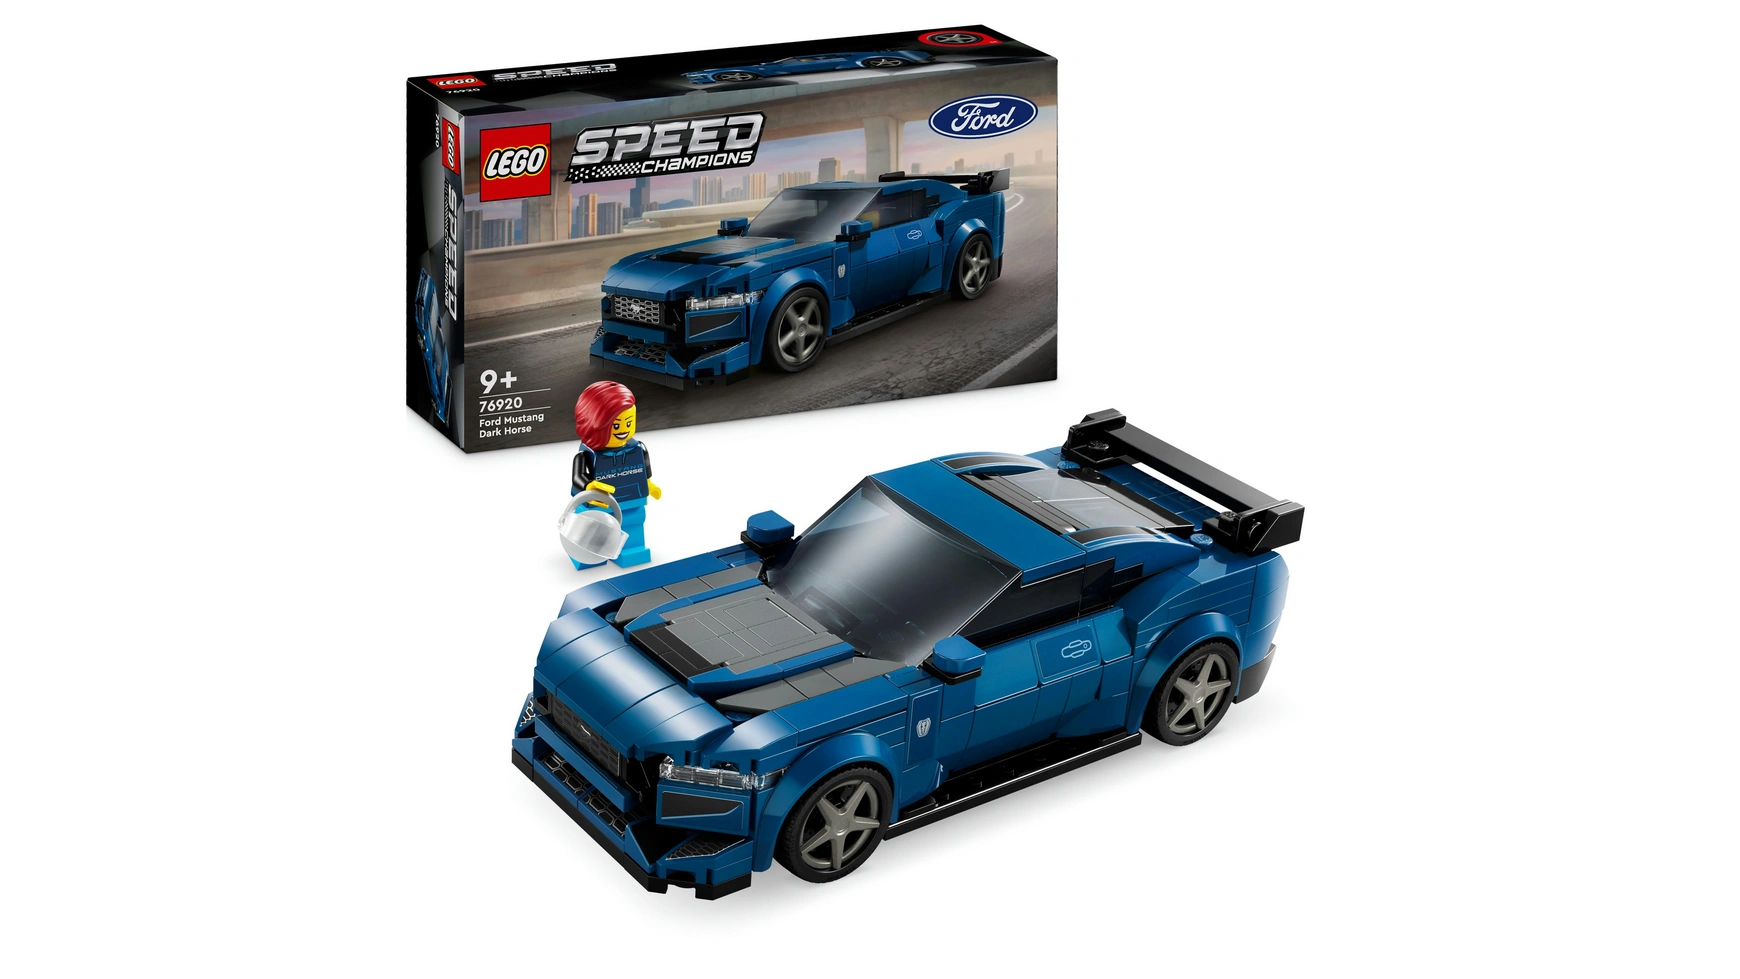 Lego Speed ​​​​Champions Игрушечный спортивный автомобиль Ford Mustang Dark Horse 1 36 ford mustang metal diecast muscle car model toys collection xmas gift office home decoration